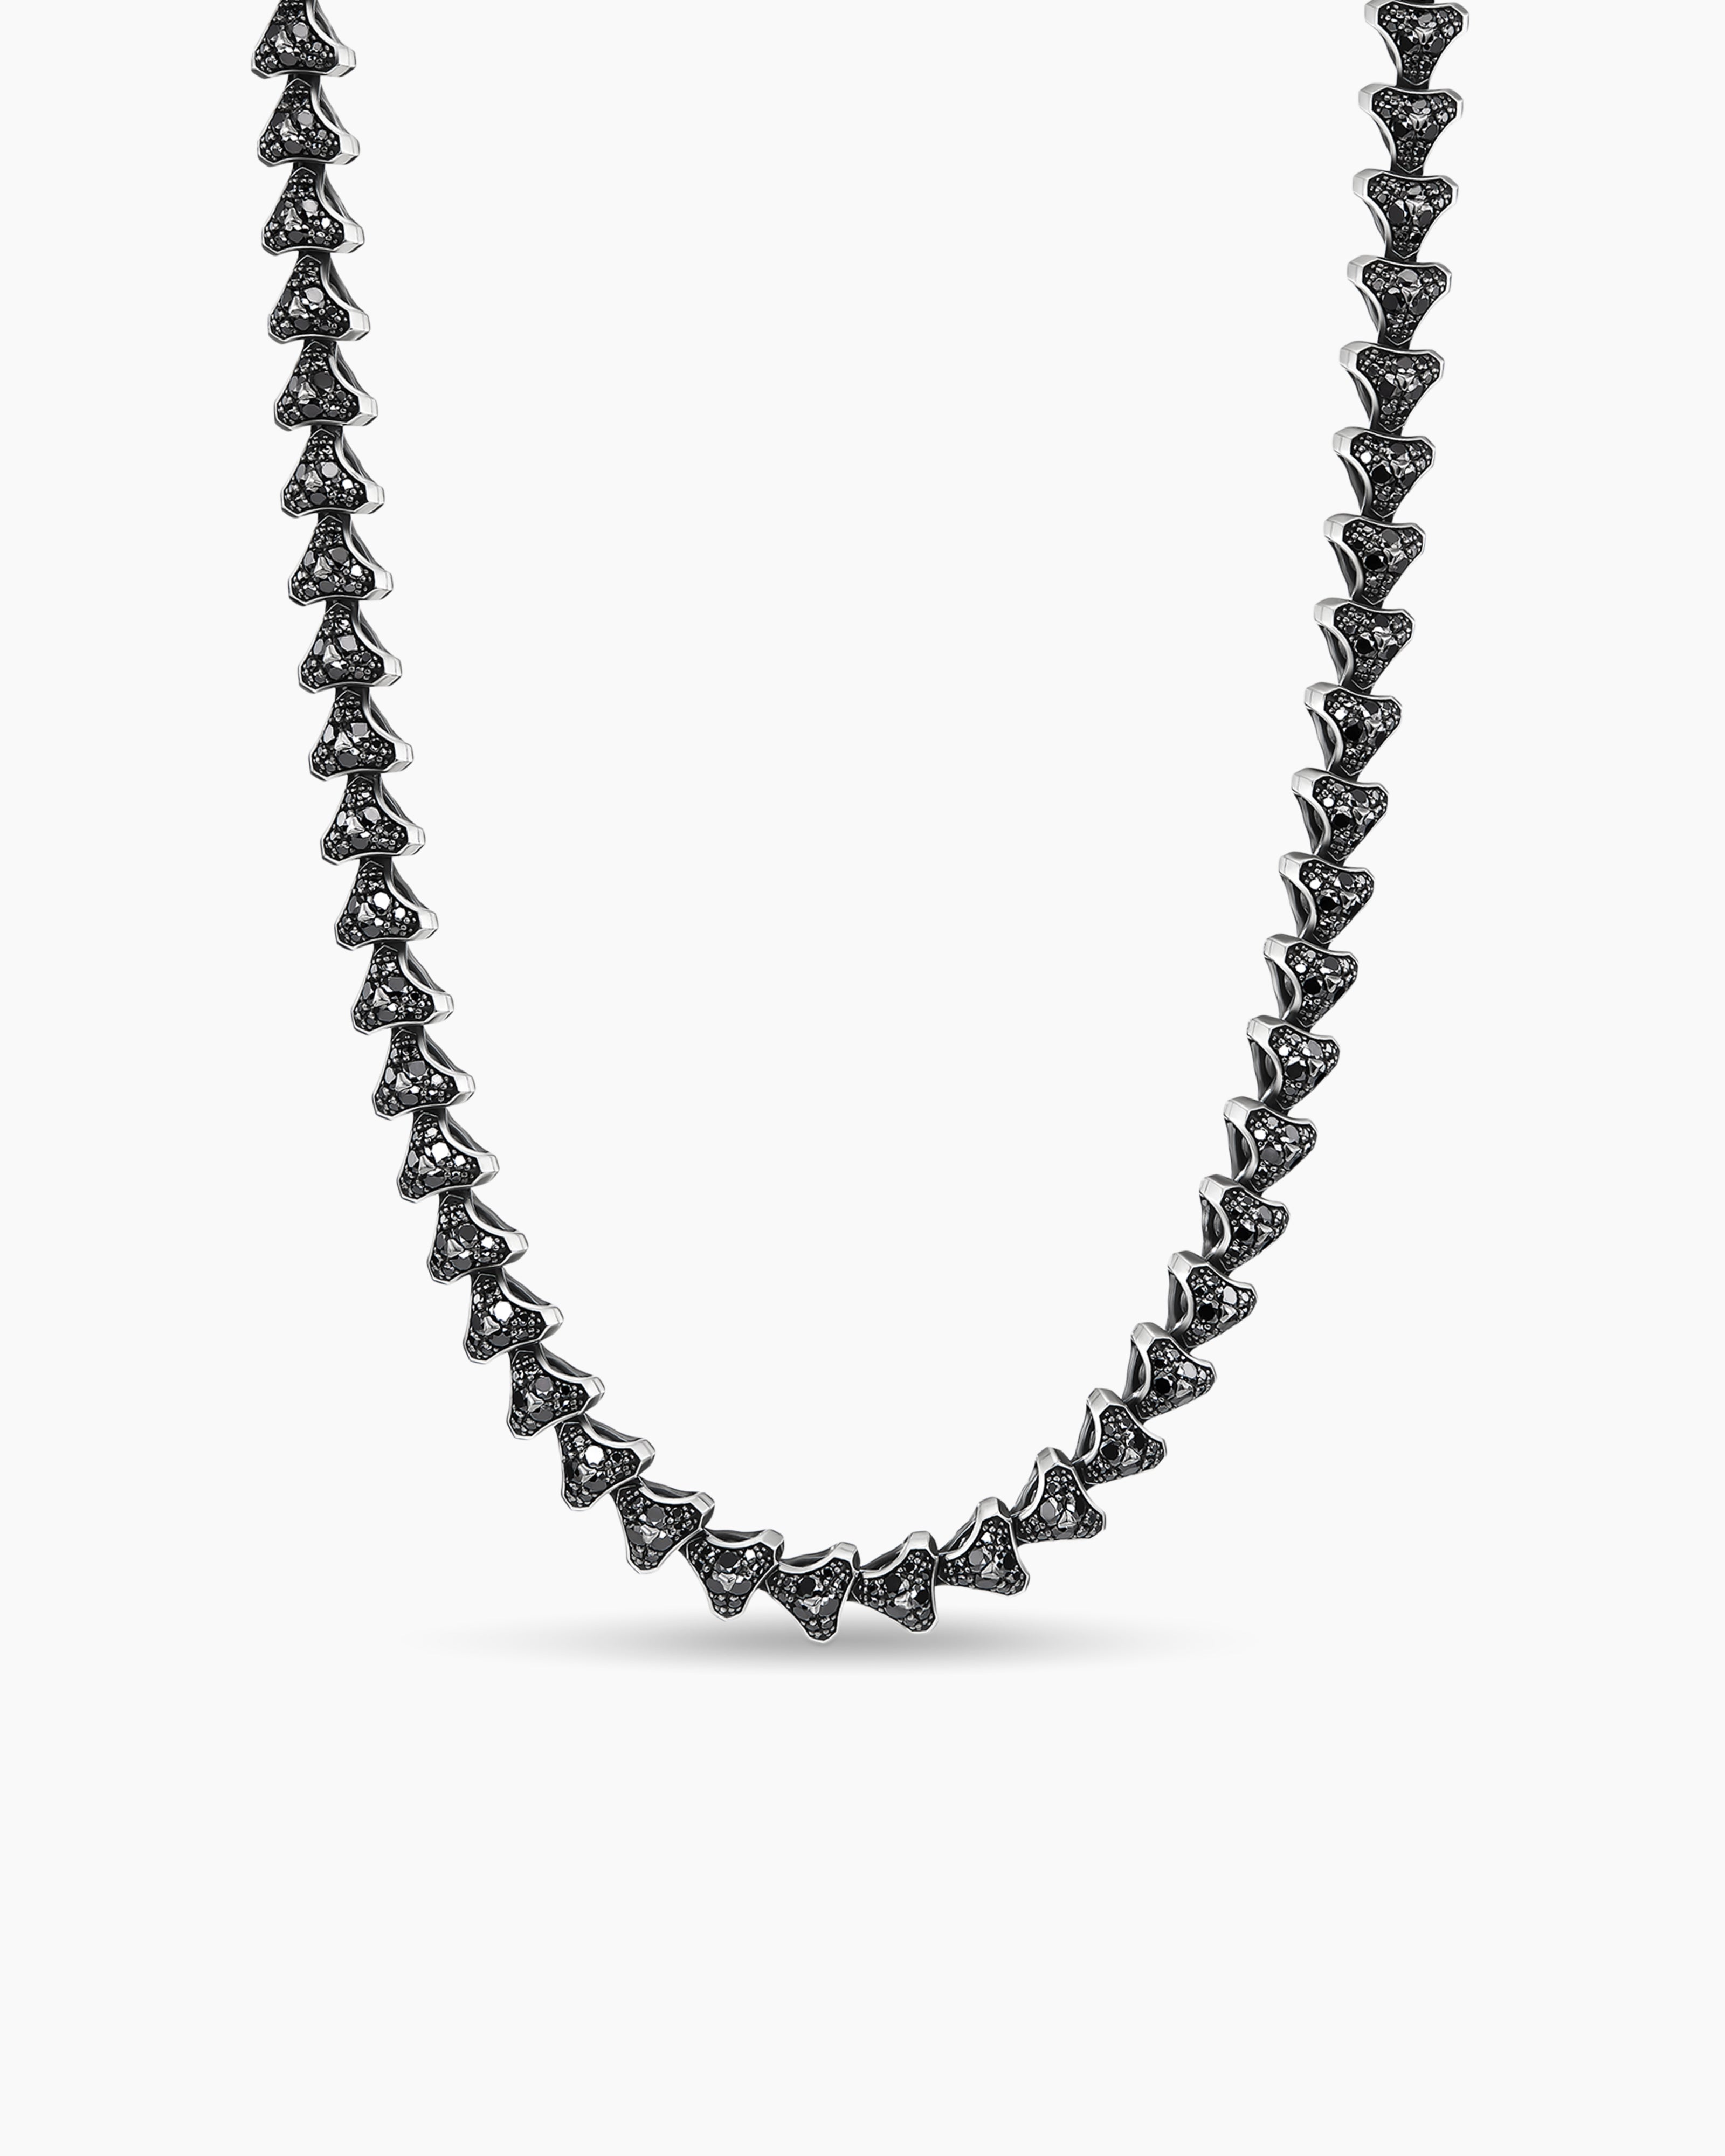 Faceted Black Diamond Beads Necklace In AAA Quality With Gold Clasp